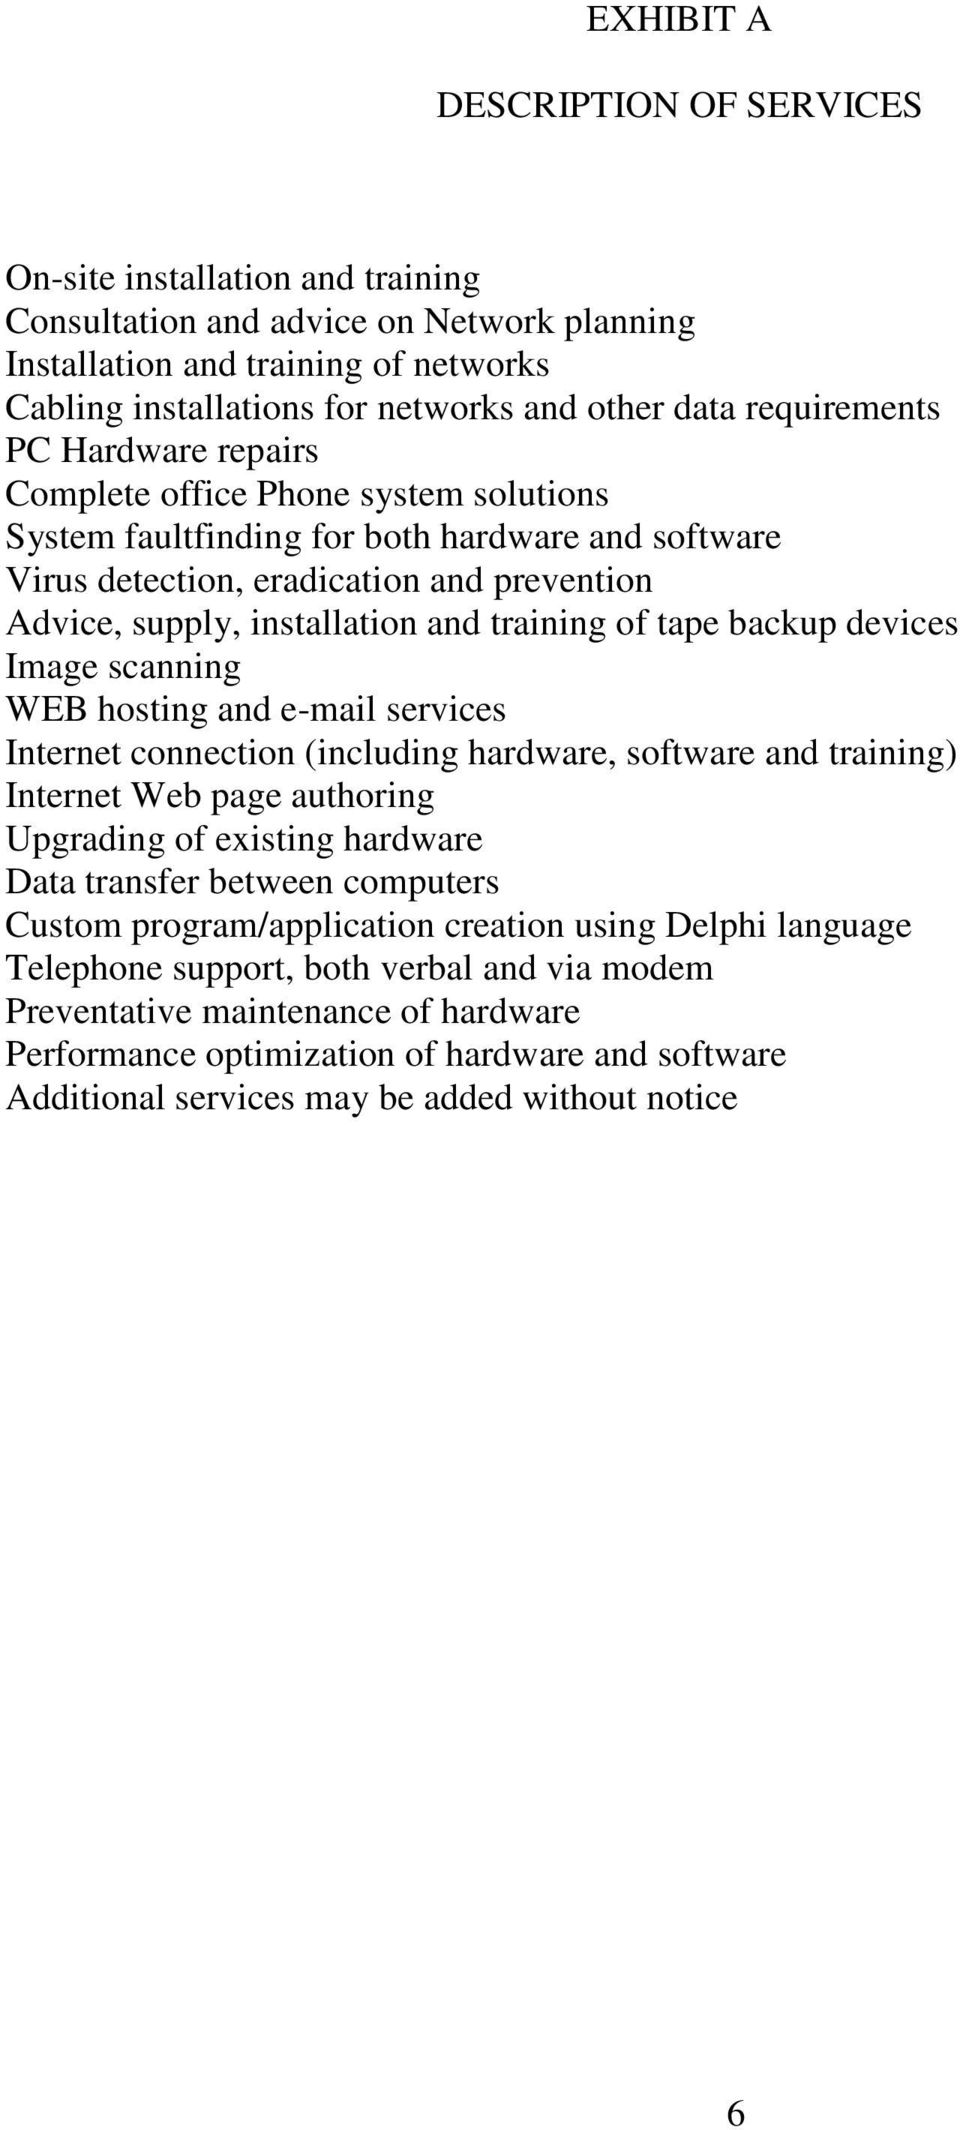 training of tape backup devices Image scanning WEB hosting and e-mail services Internet connection (including hardware, software and training) Internet Web page authoring Upgrading of existing